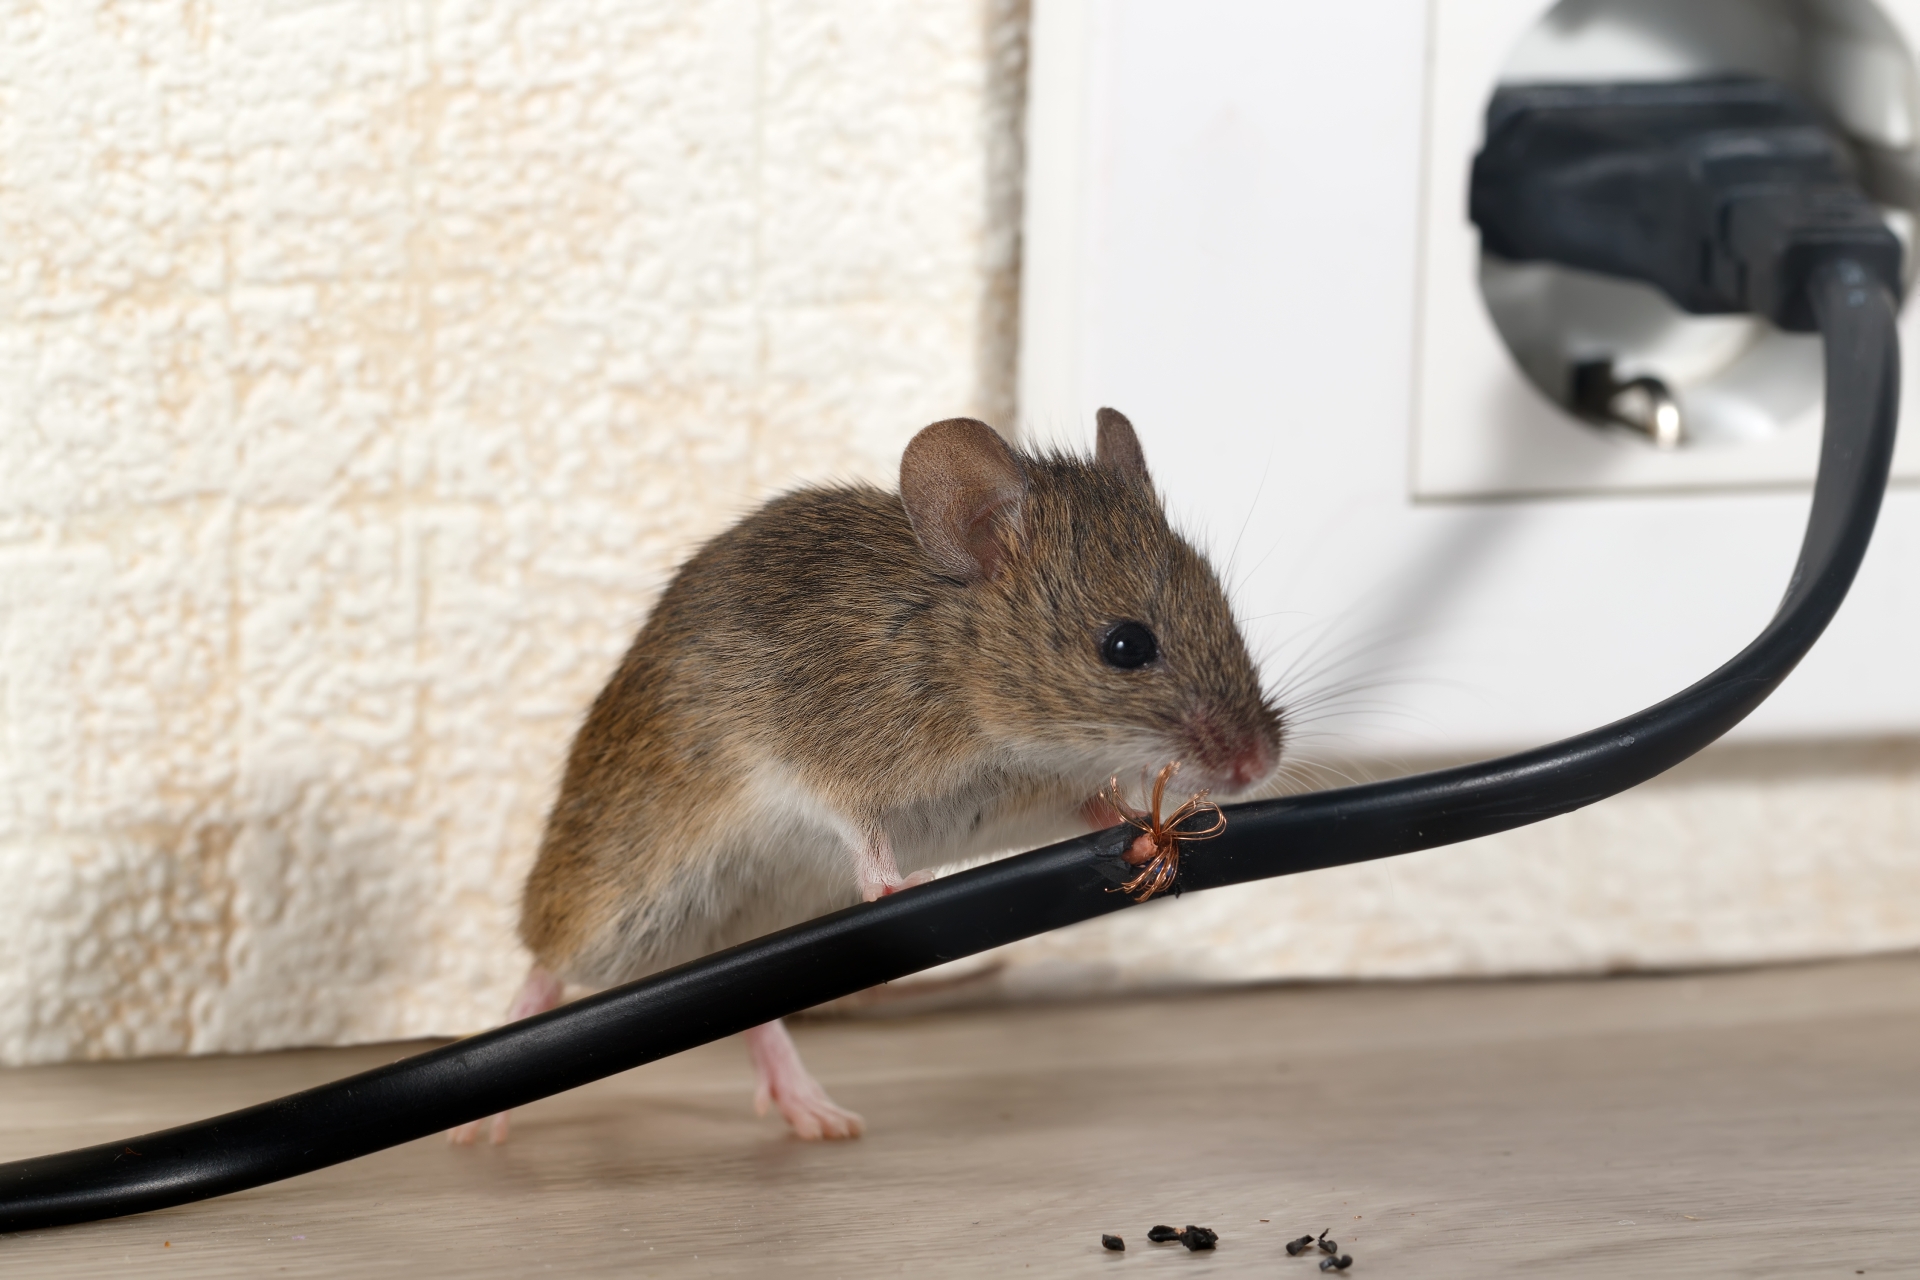 Mice Infestation, Pest Control in Ealing, W5. Call Now 020 8166 9746